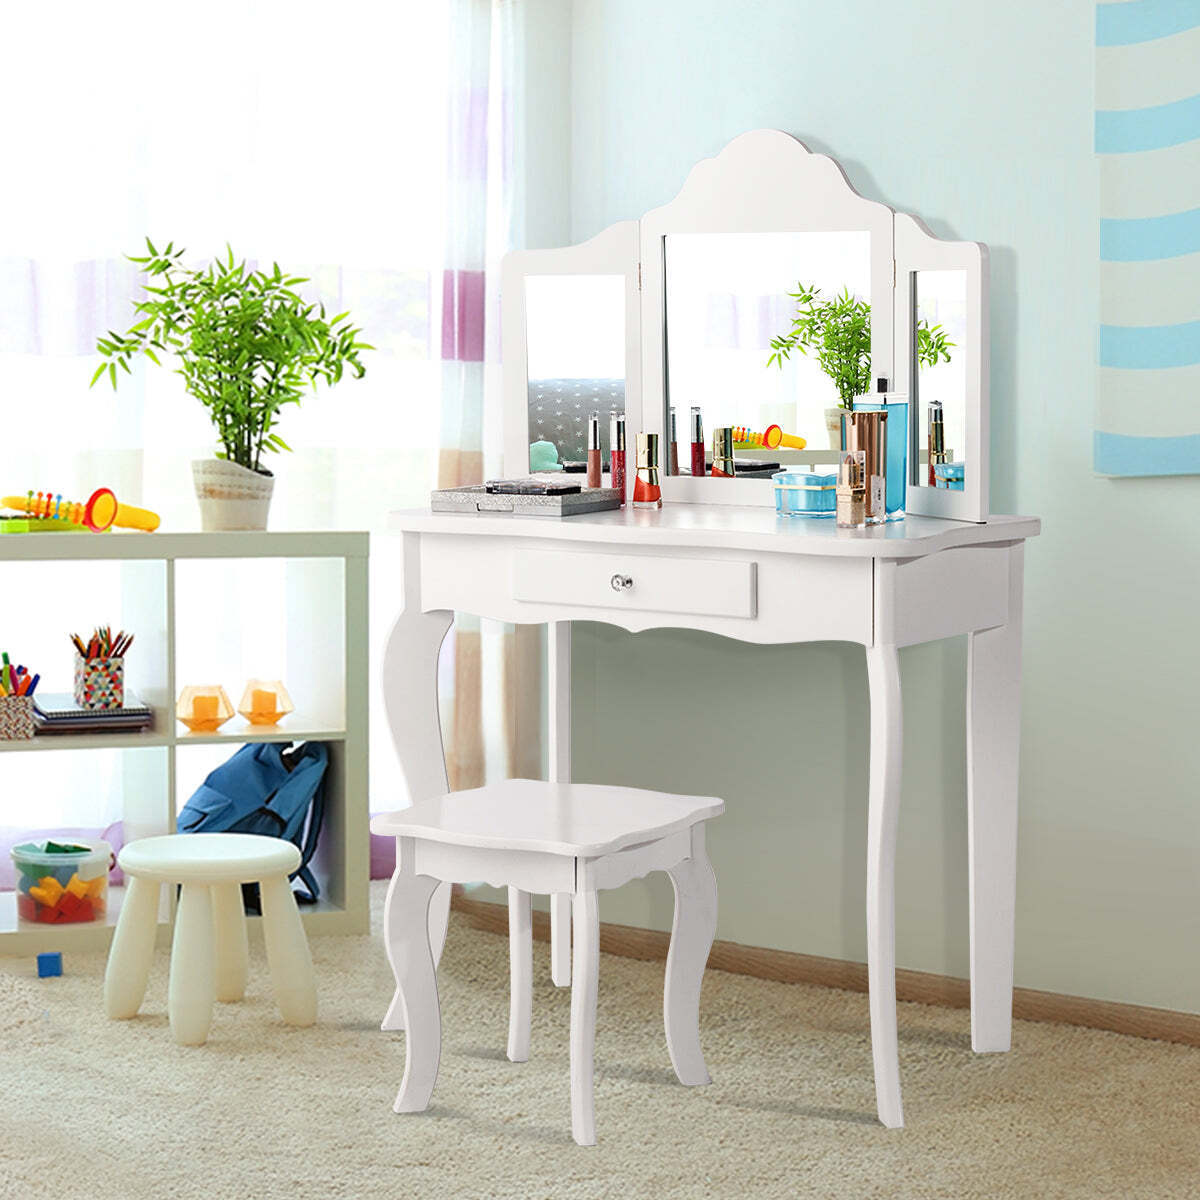 NNECW Kids Dressing Table Set with Stool & Mirror for Children Ages 3-7-White